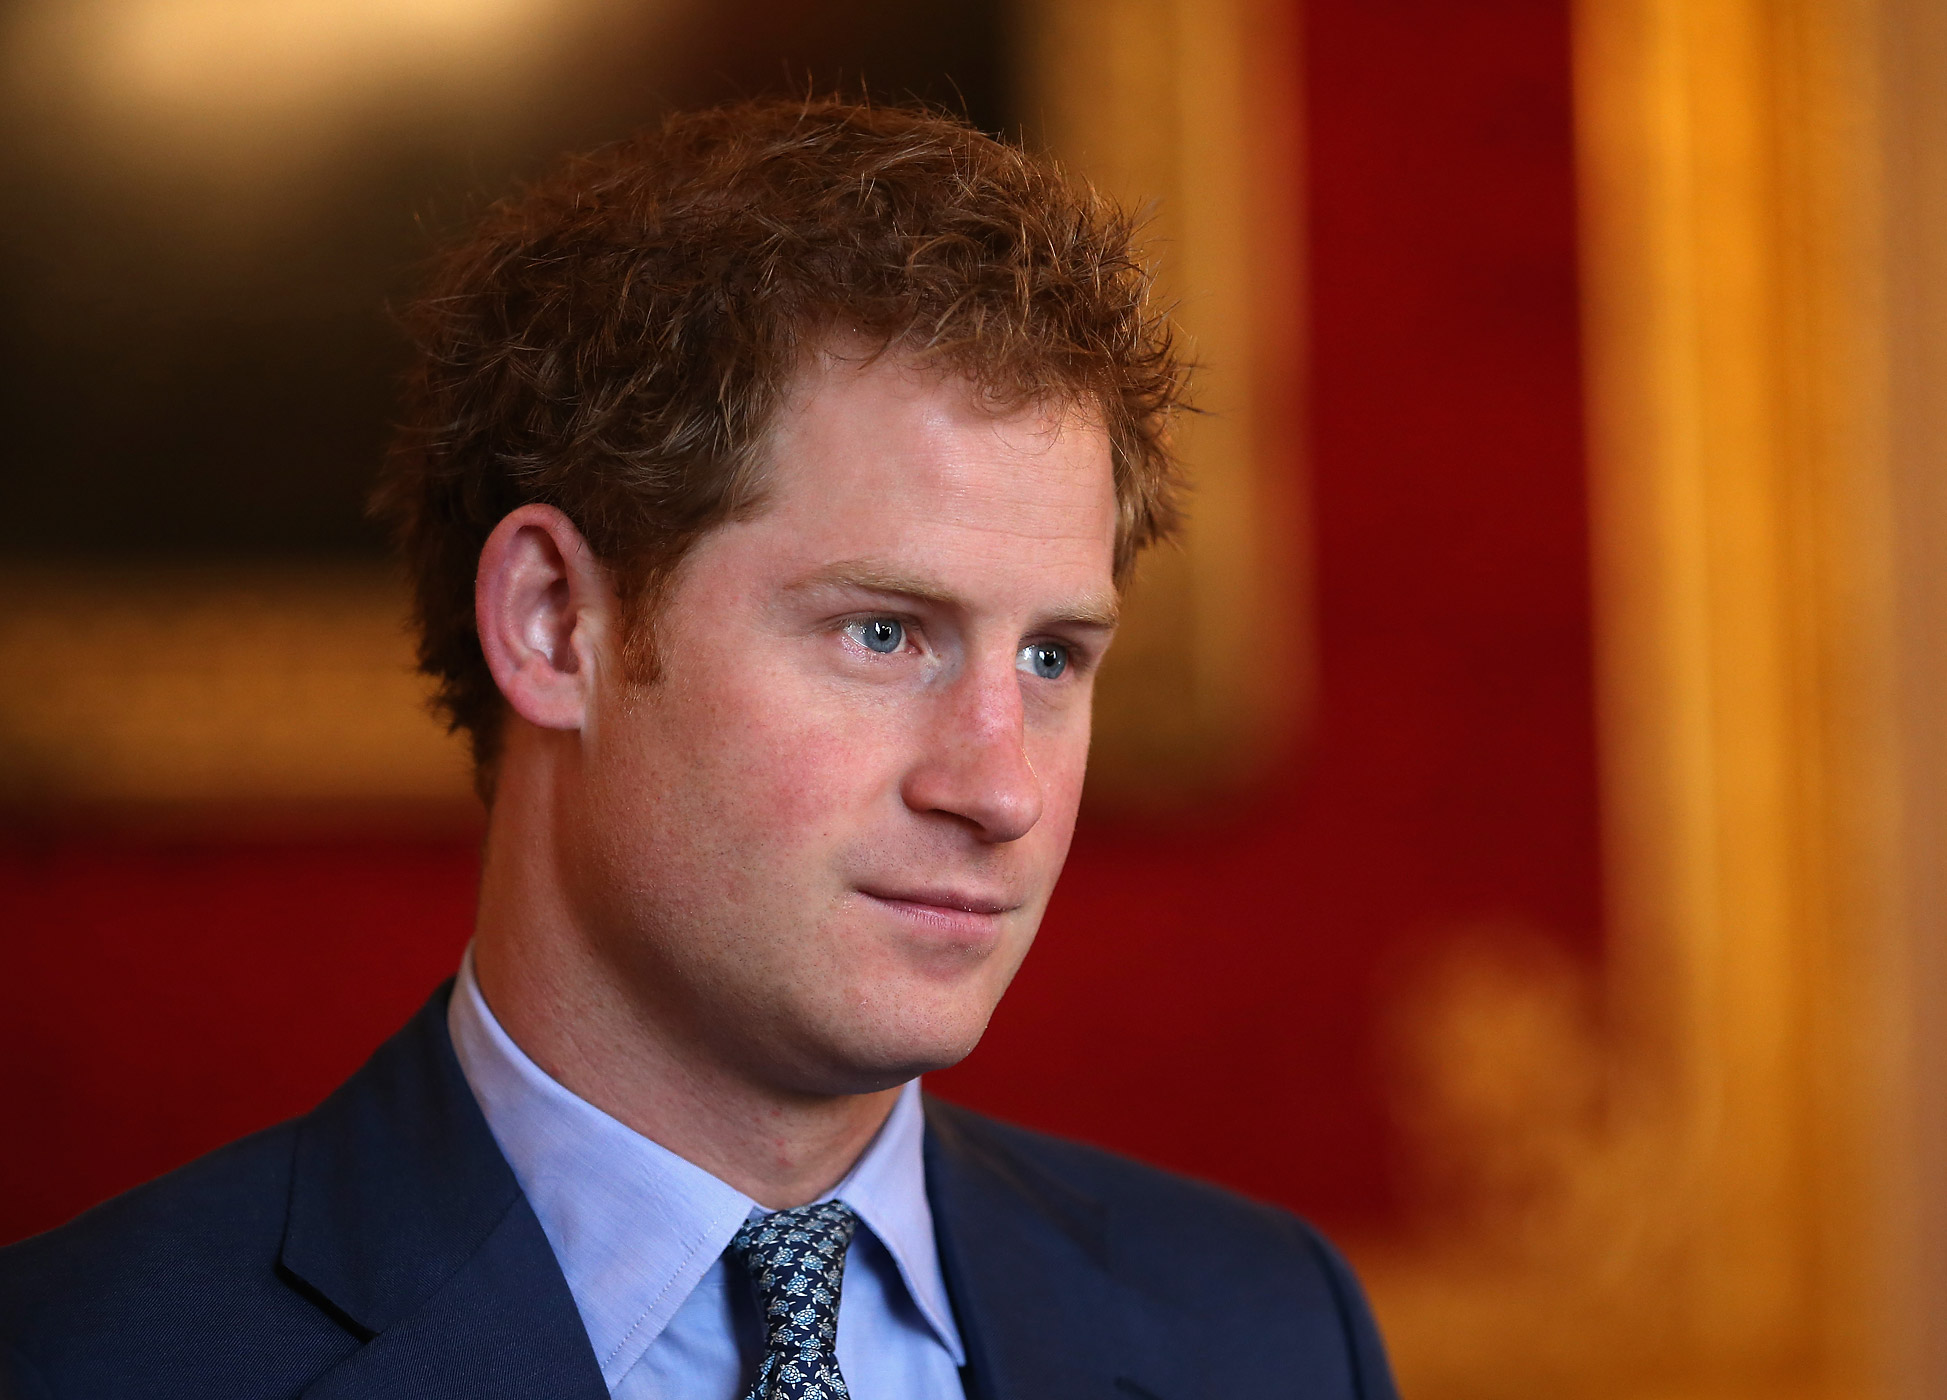 Prince Harry chats with Coach Core graduates during a Coach Core Graduation event at St James's Palace on Jan. 14, 2015 in London, England. (Chris Jackson—Getty Images)